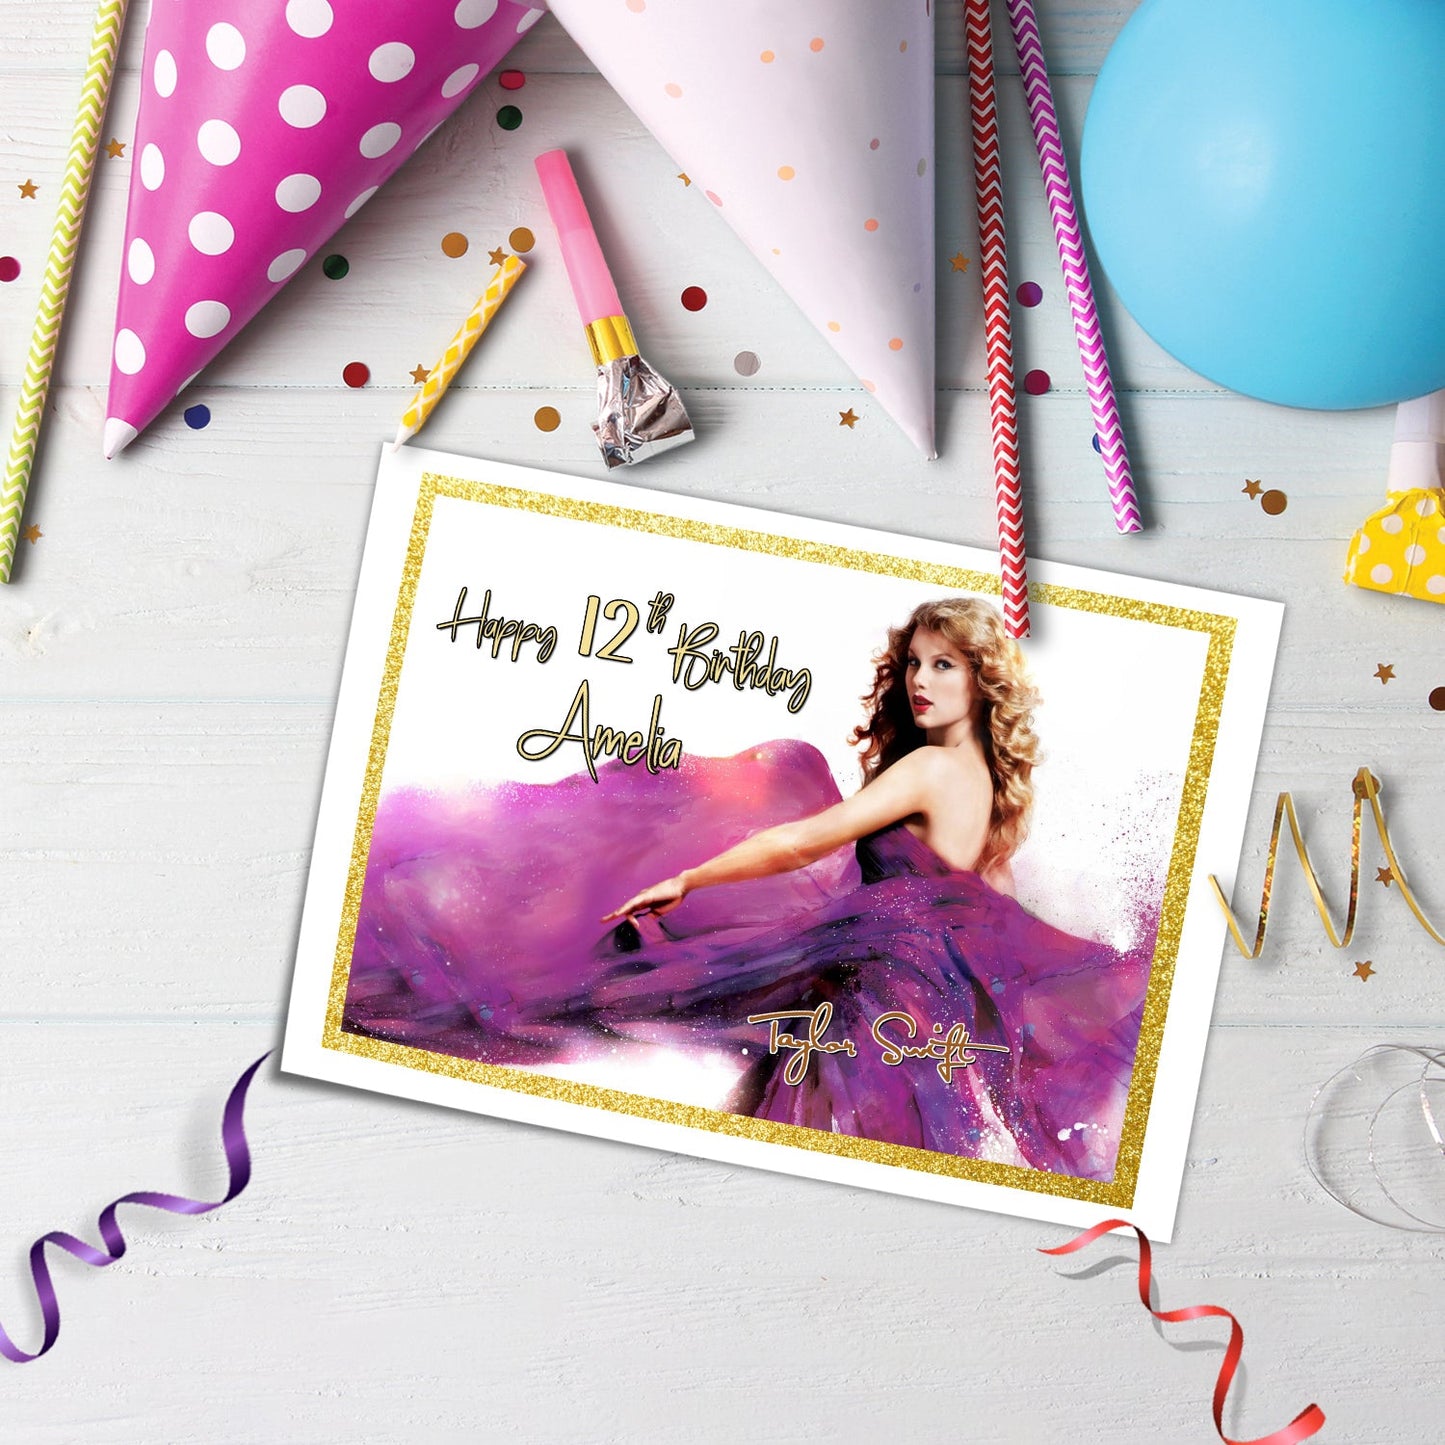 Rectangle Taylor Swift Personalized Cake Images - Make Your Cake Stand Out